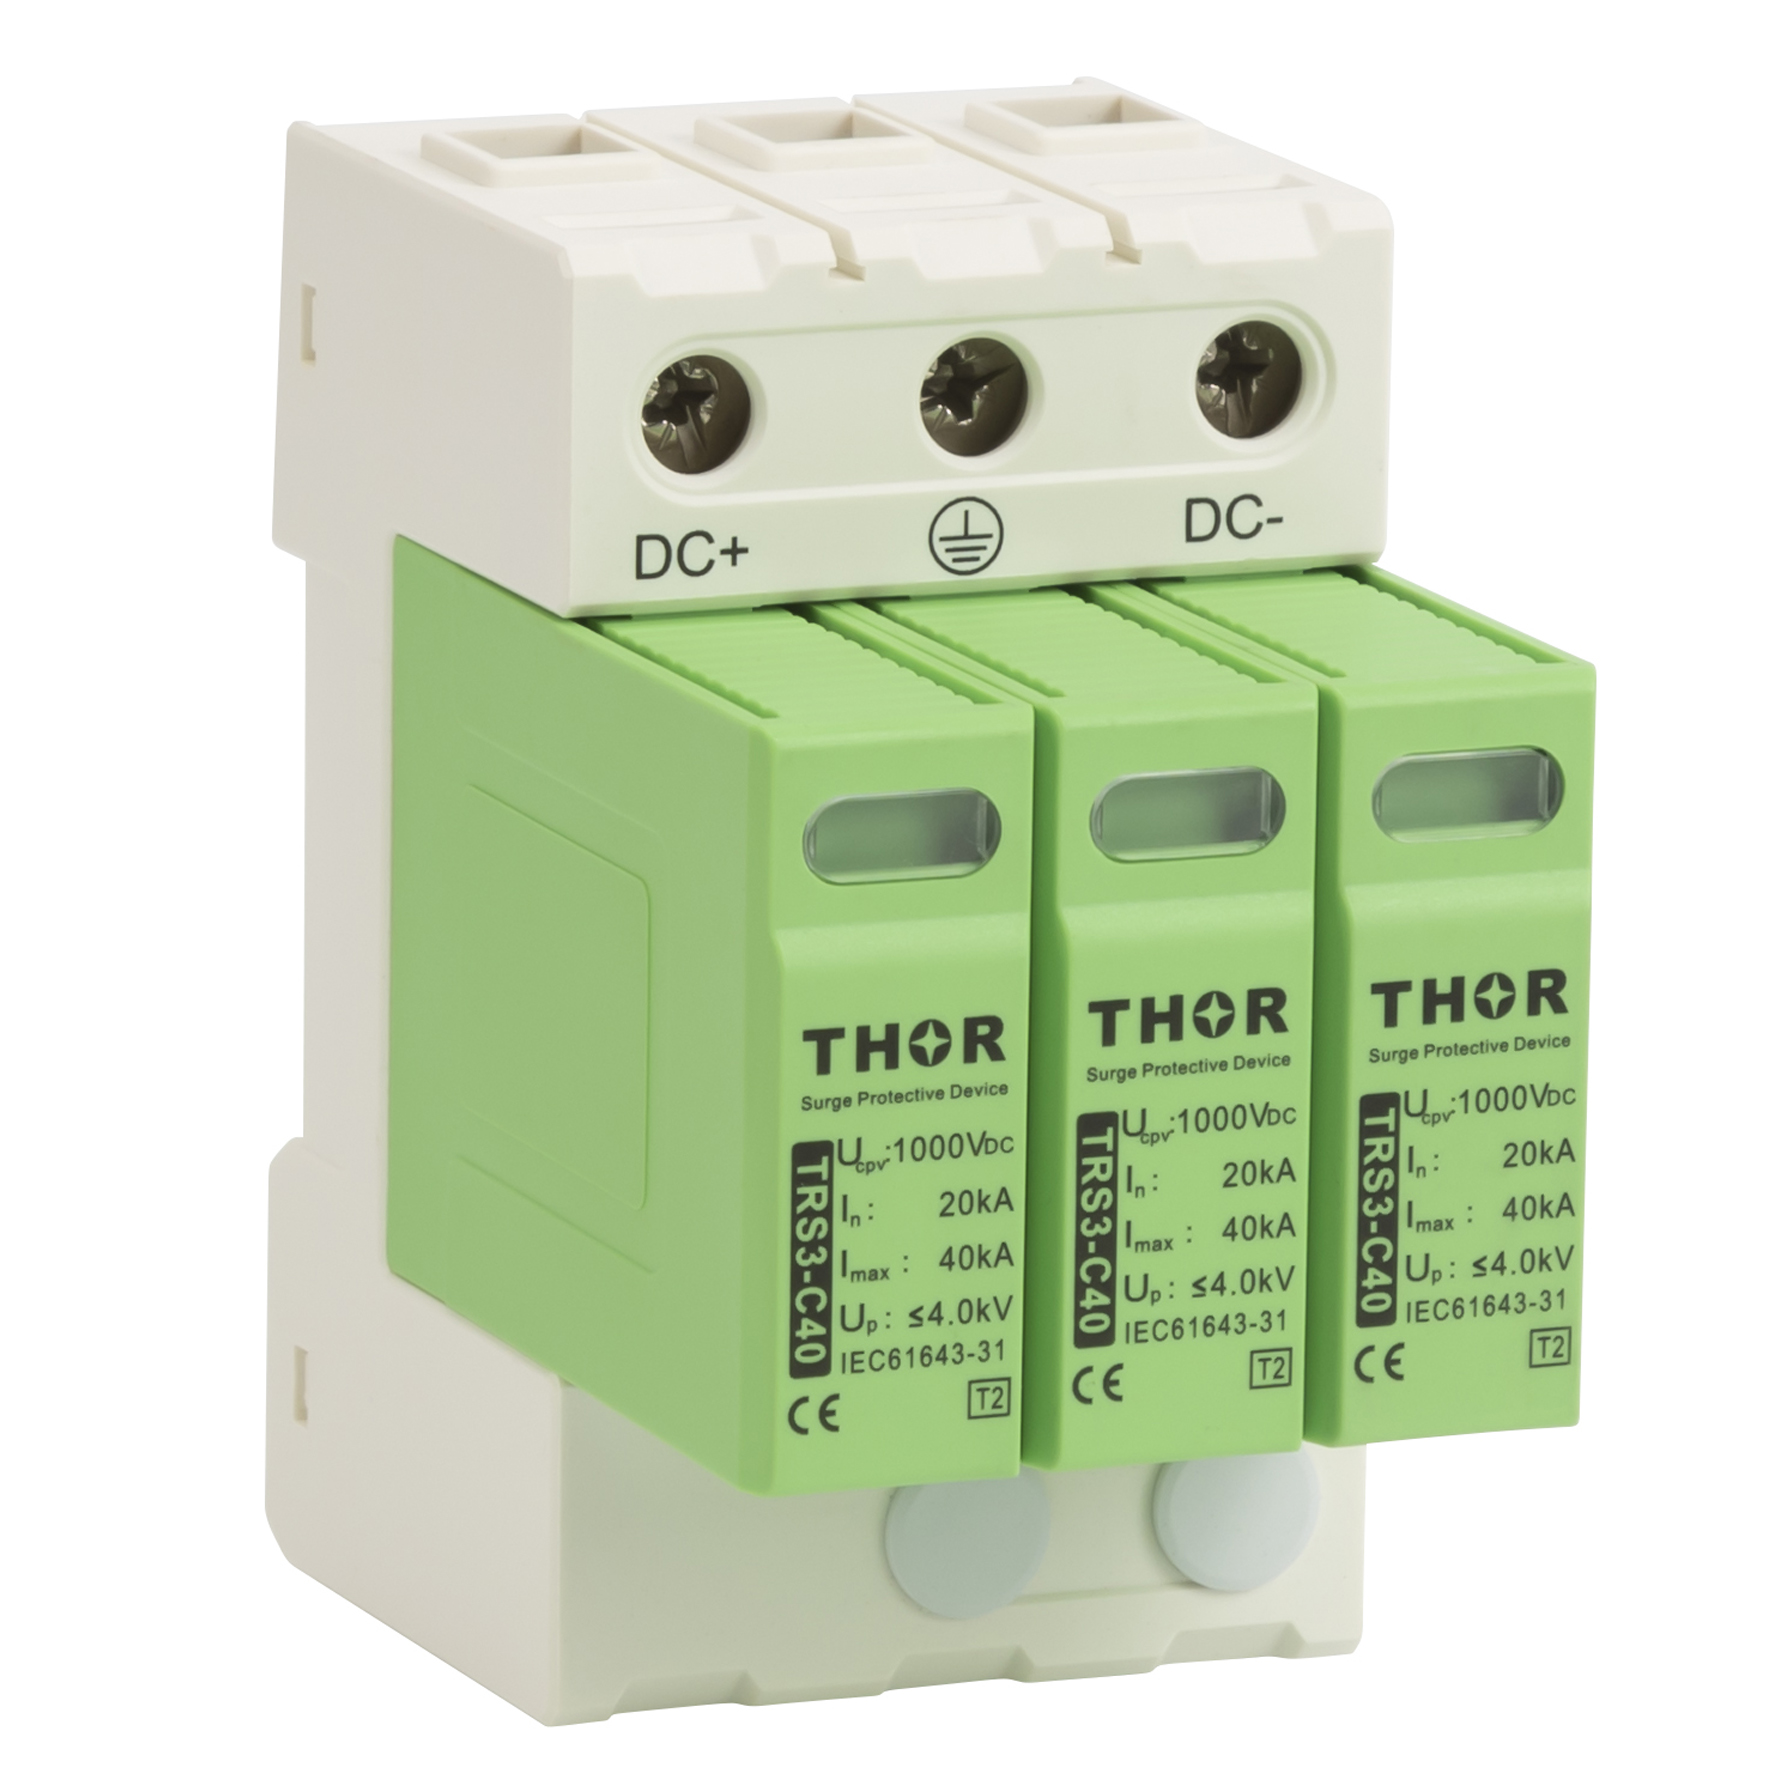 Type 1+ 2 DC photovoltaic surge protection device TRS3 series